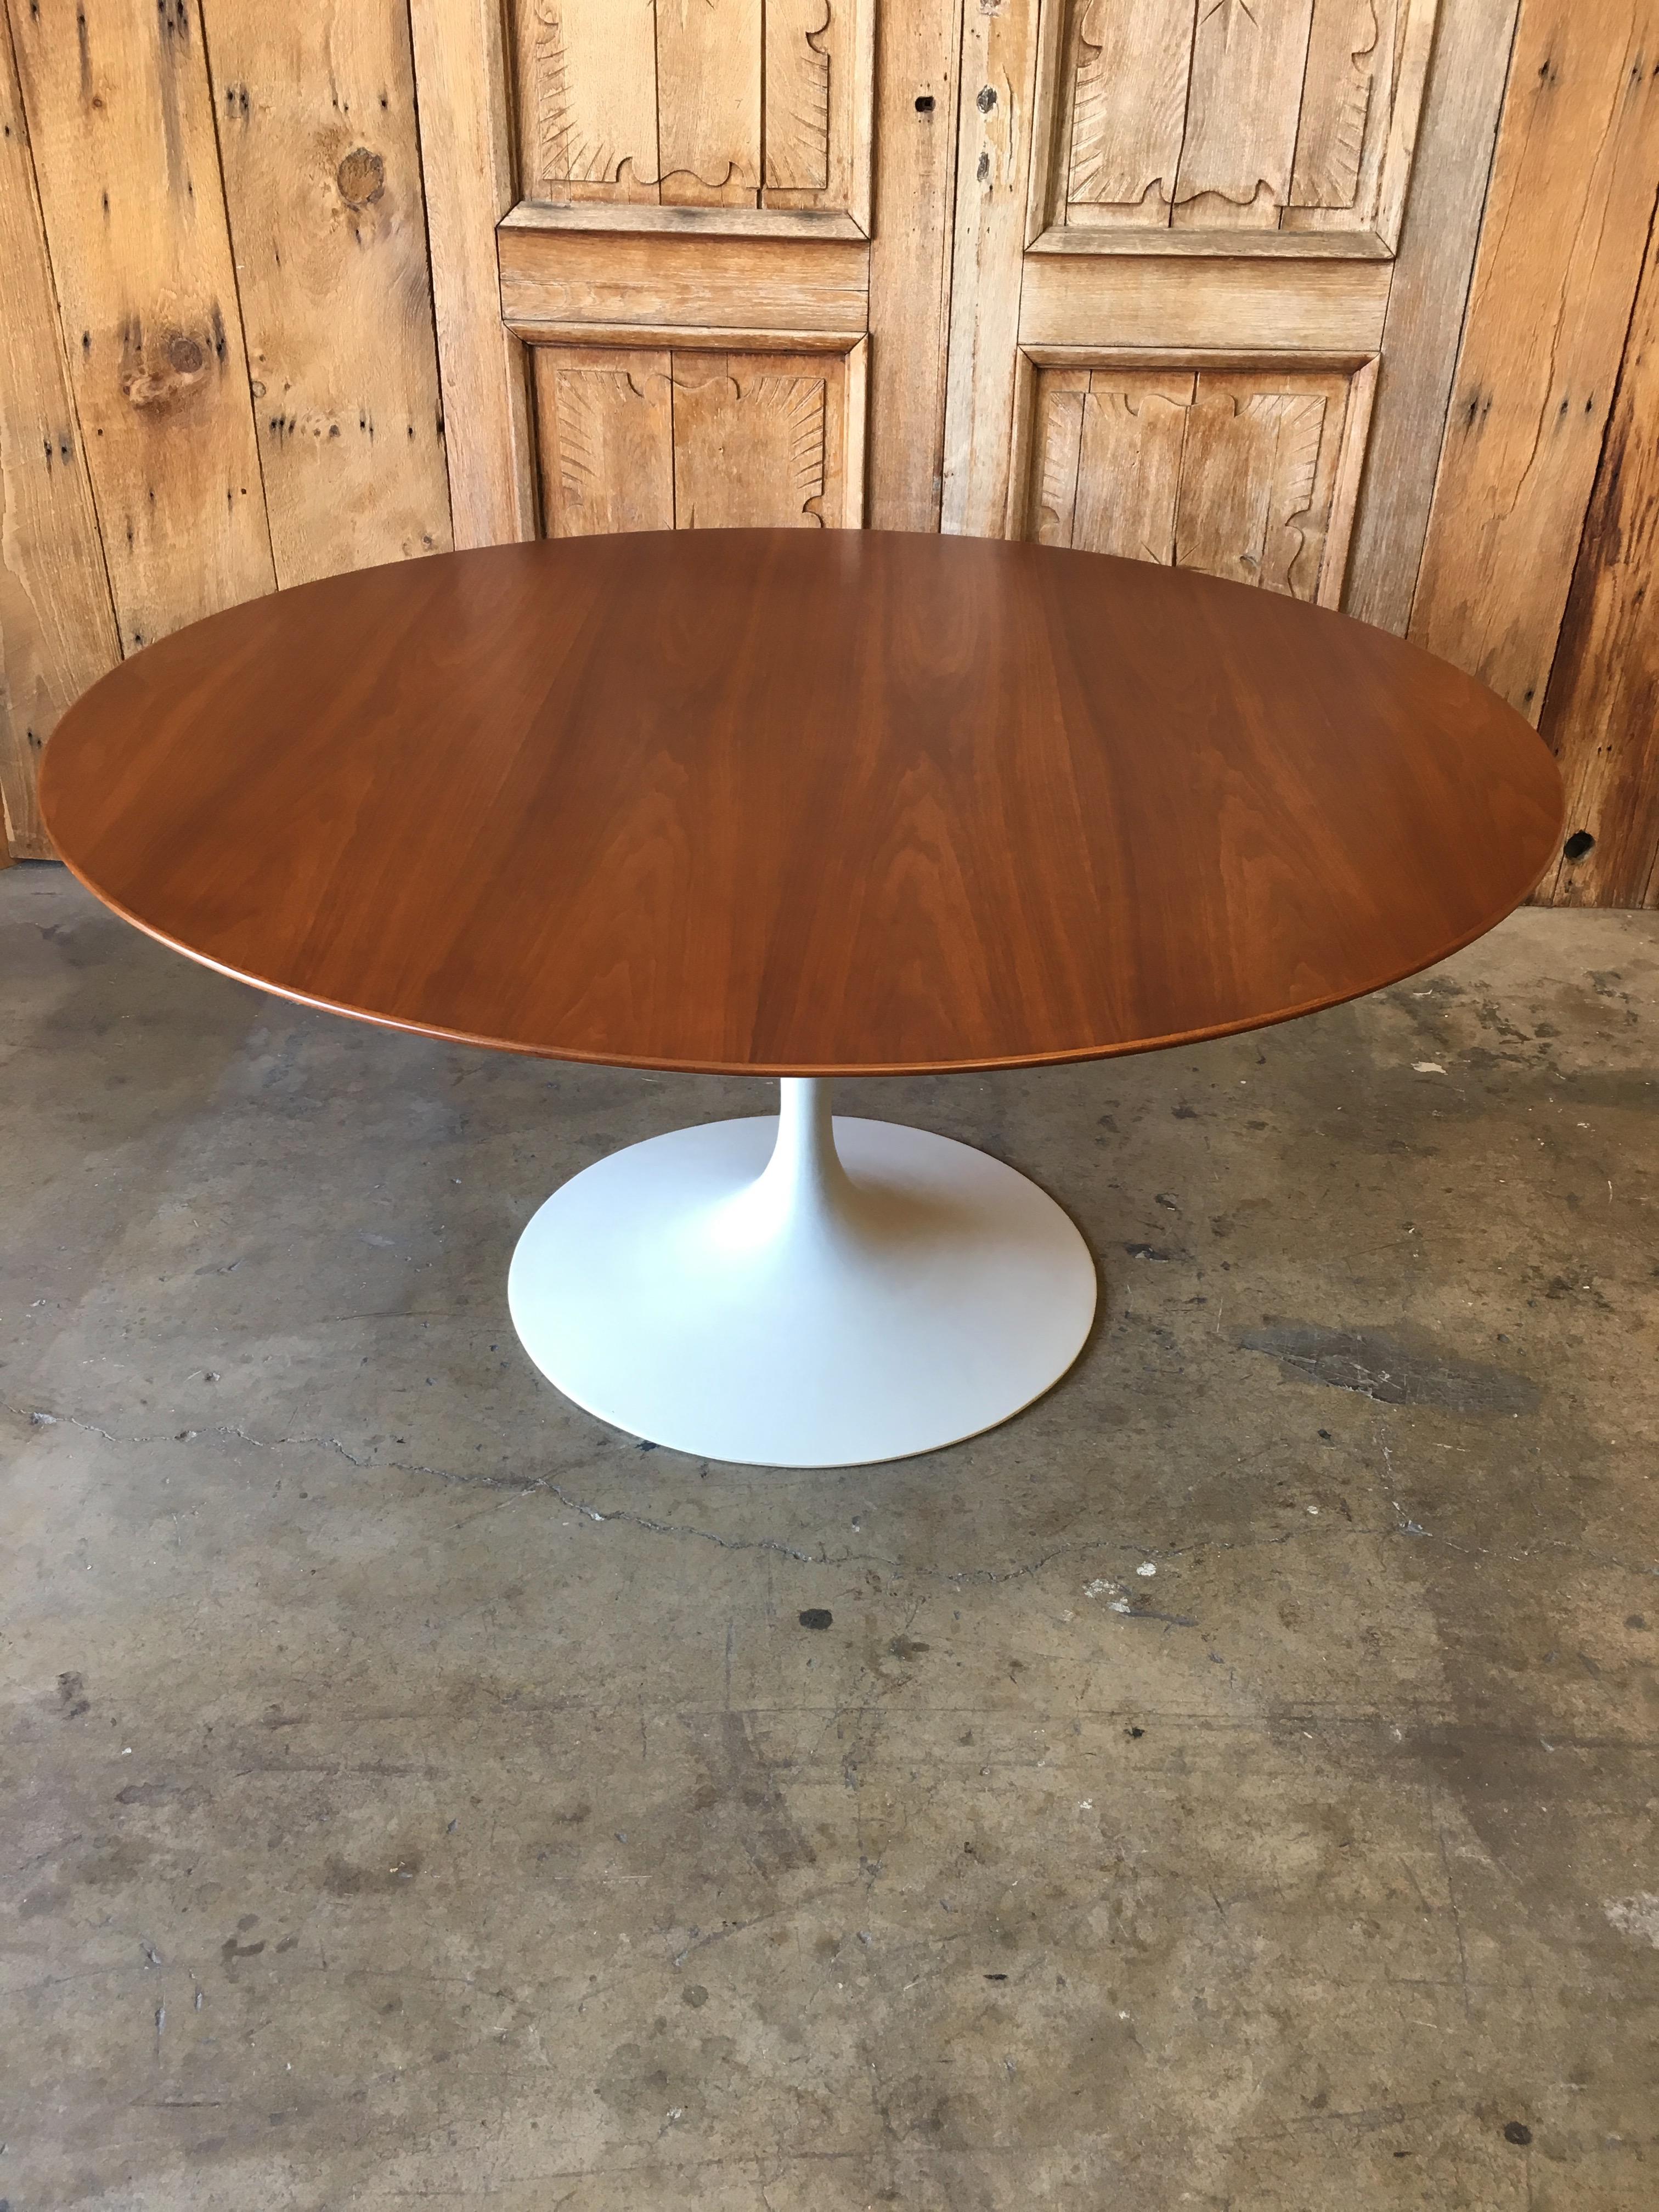 North American Eero Saarinen Walnut and Off-White Tulip Dining Table for Knoll